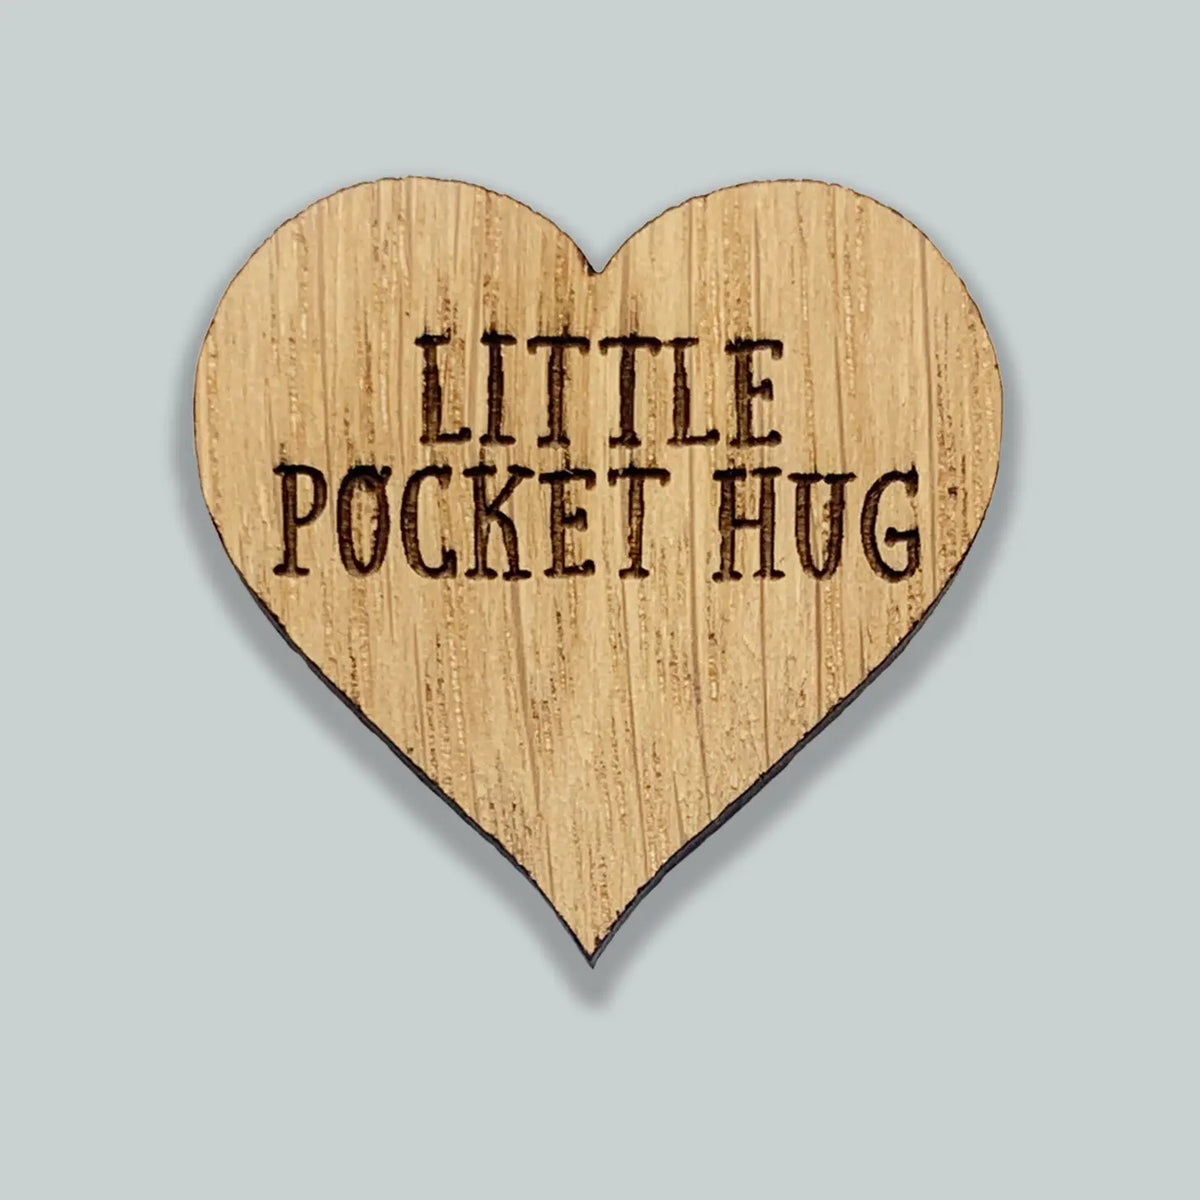 Daughter, Another Word for Best Friend | Little Pocket Hug